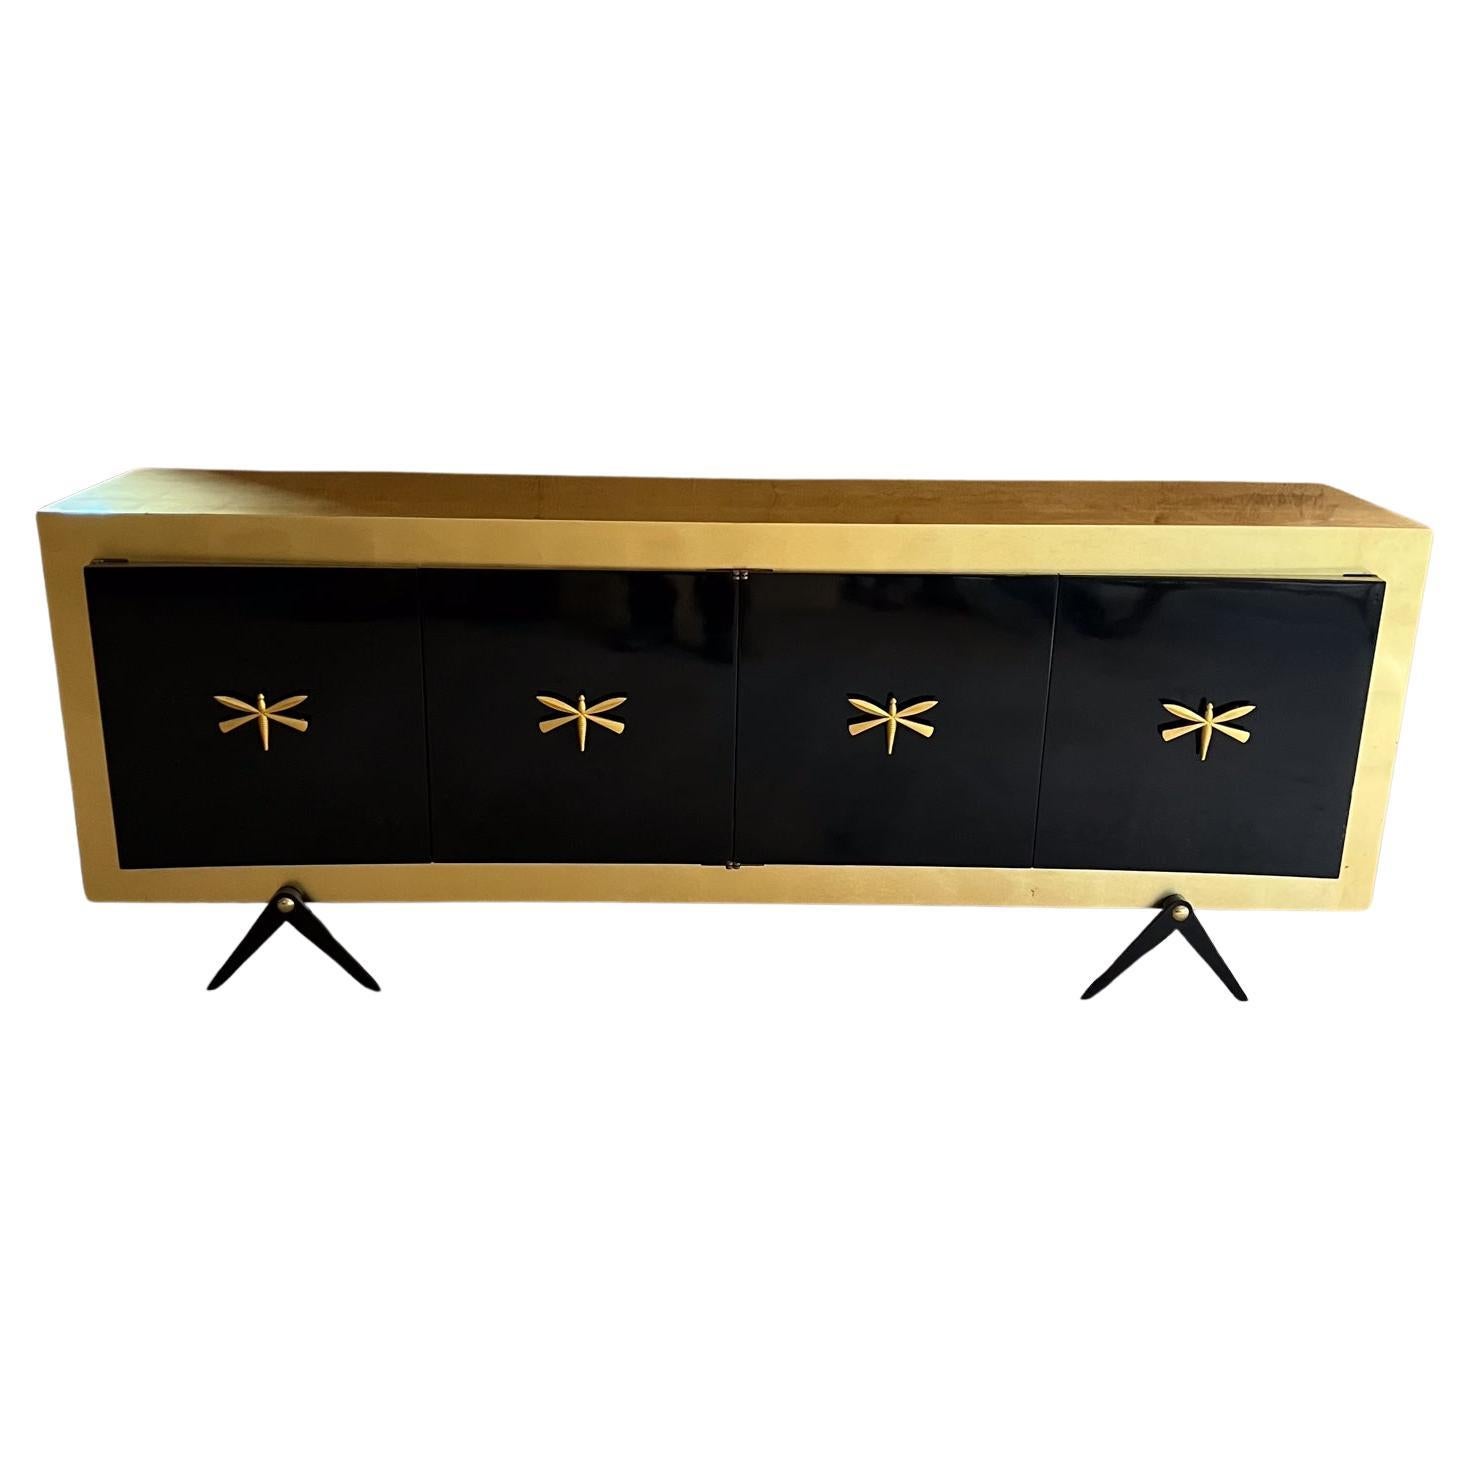 1950s Arturo Pani Black Dragonfly Credenza with Gold Leaf For Sale